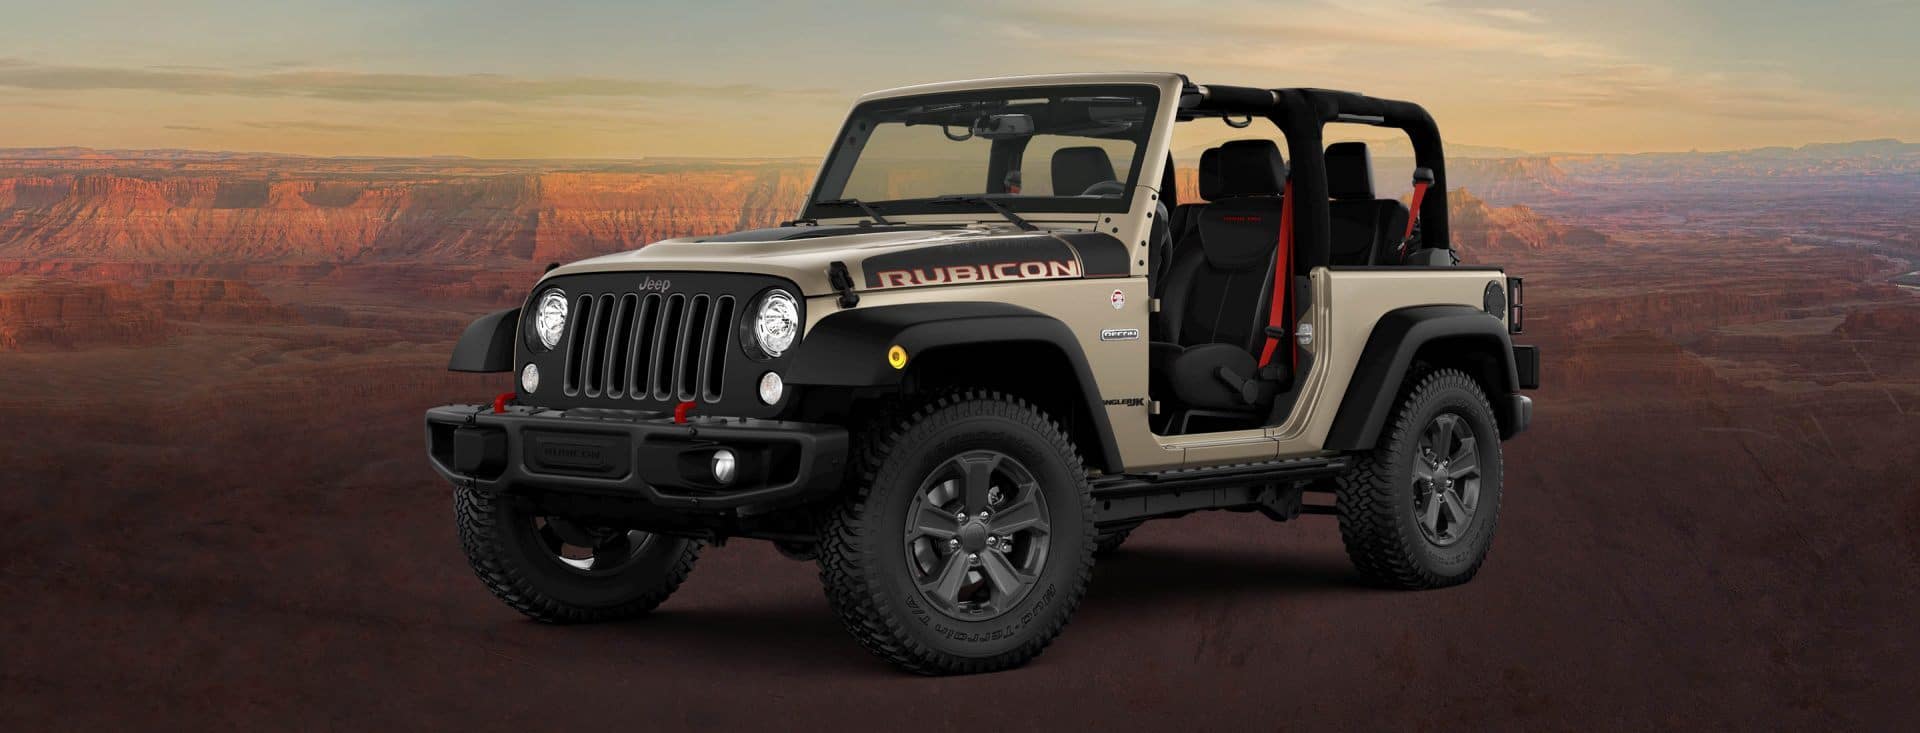 Limited Edition Trims for the 2018 Jeep® Wrangler JK